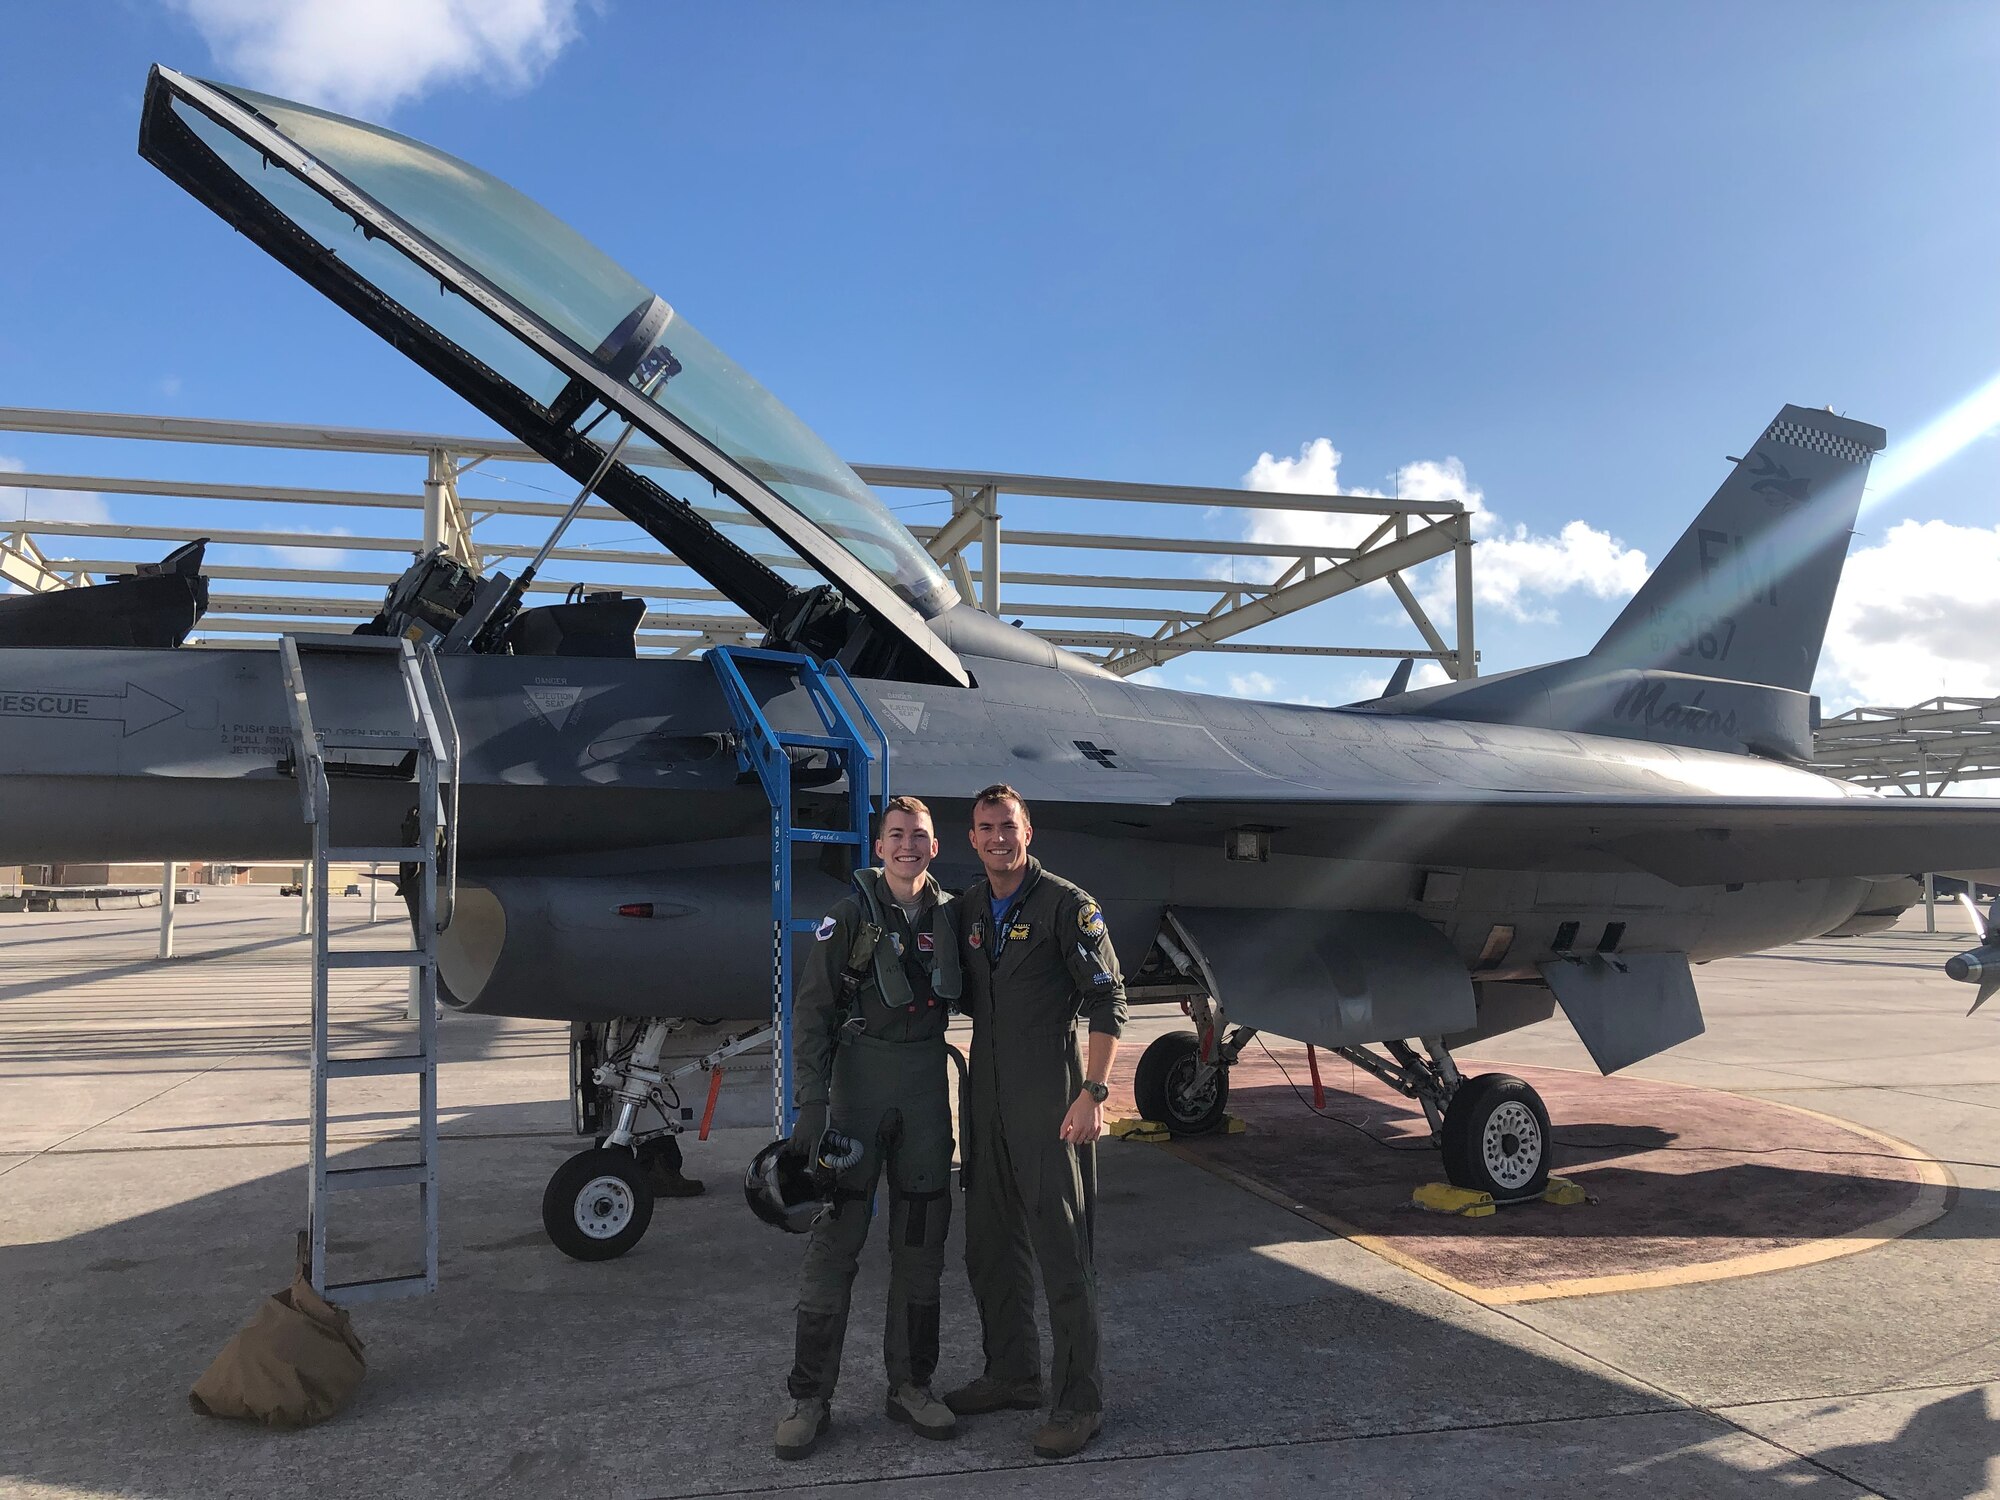 U.S. Air Force 1st Lt. Chad Chapman (left), 47th Student Squadron T-38 Talon student pilot, poses with his older brother, Capt. James Chapman (right). (U.S. Air Force courtesy photo)